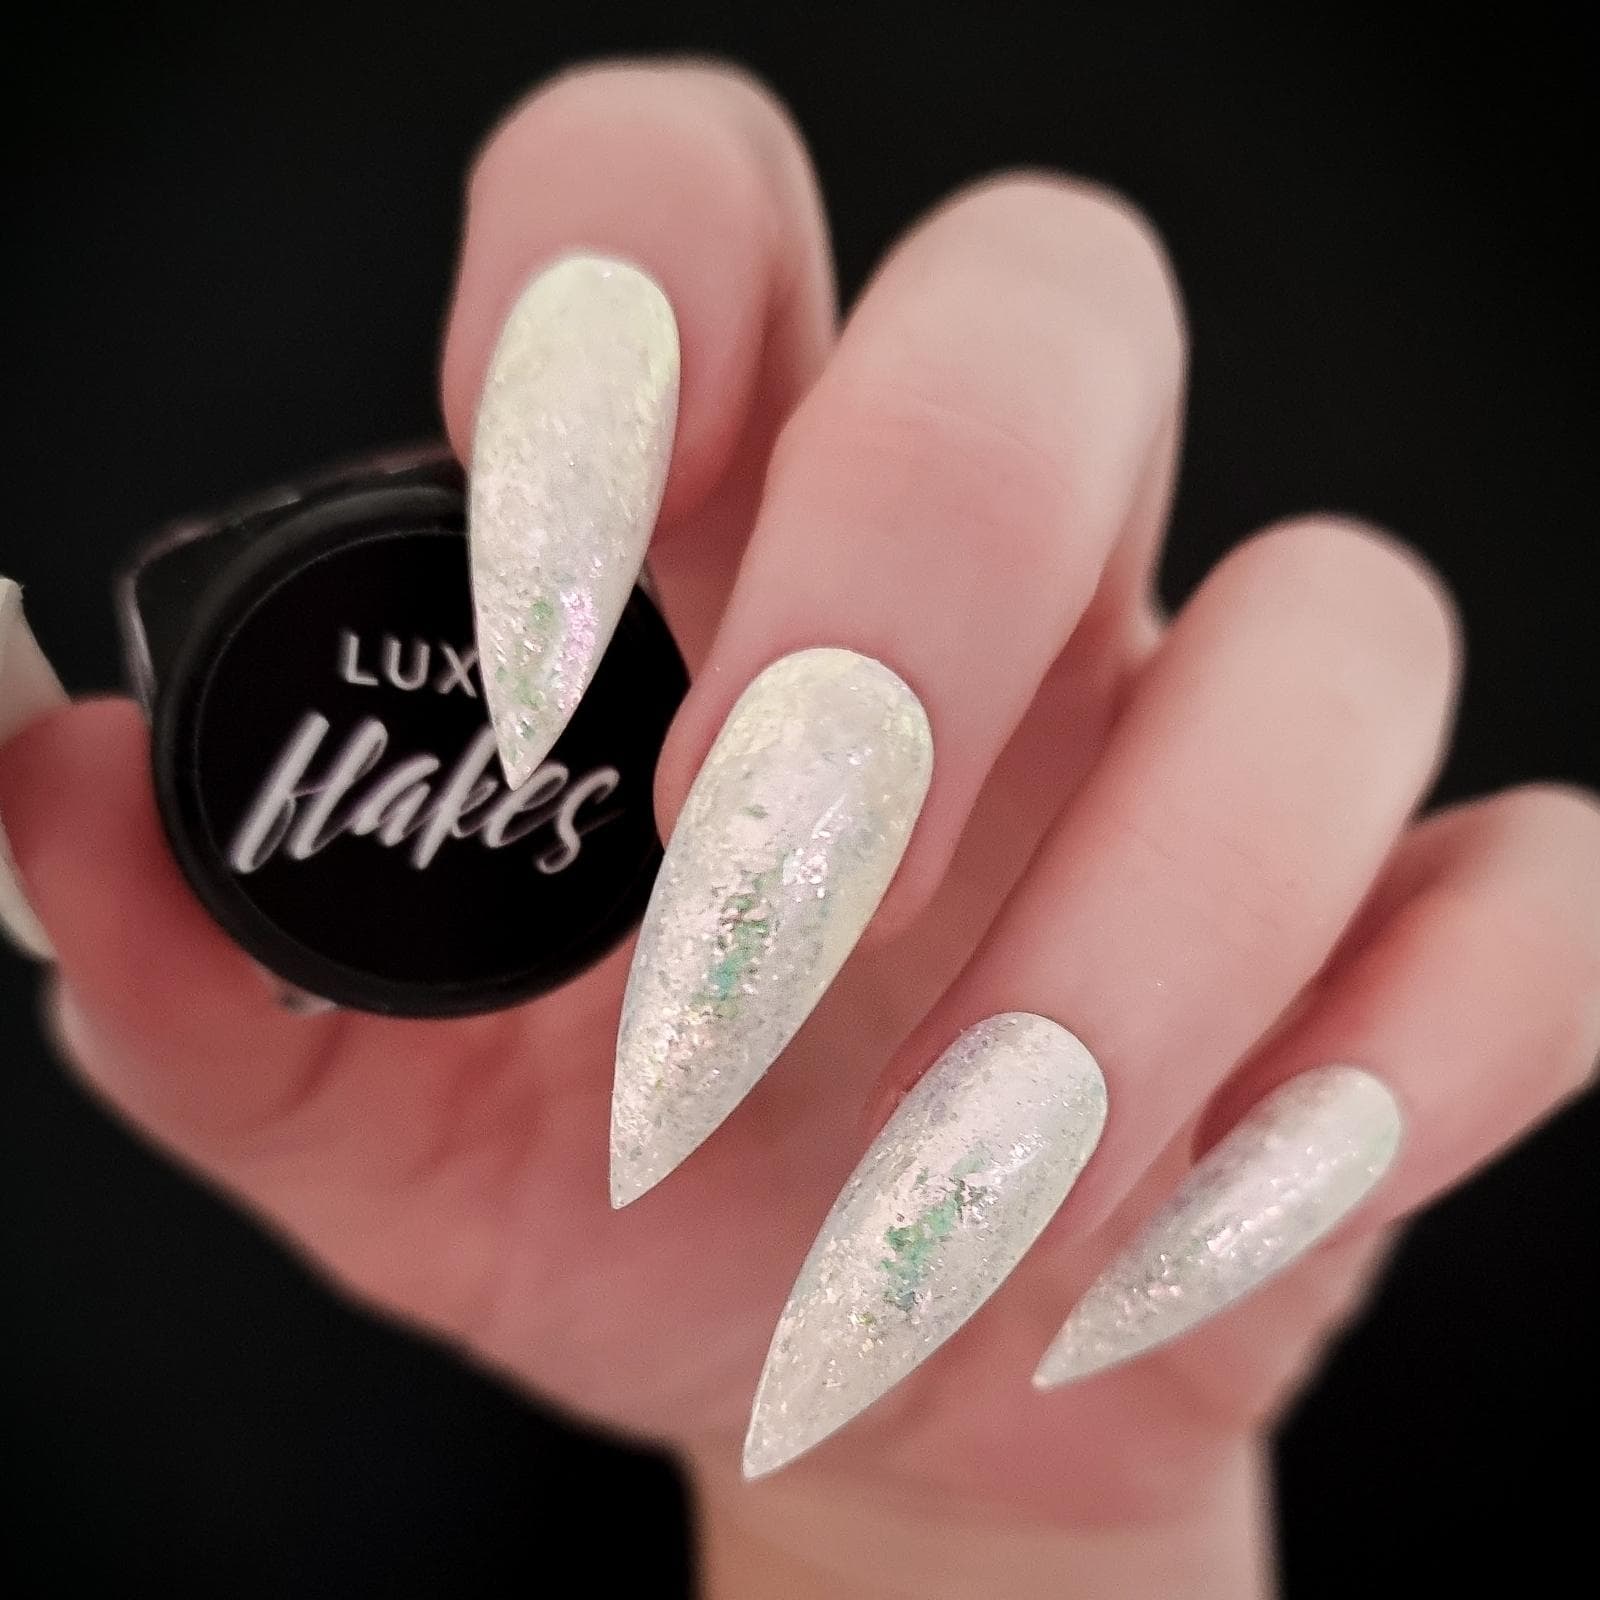 Luxapolish Pastel Flakes - Candy Floss